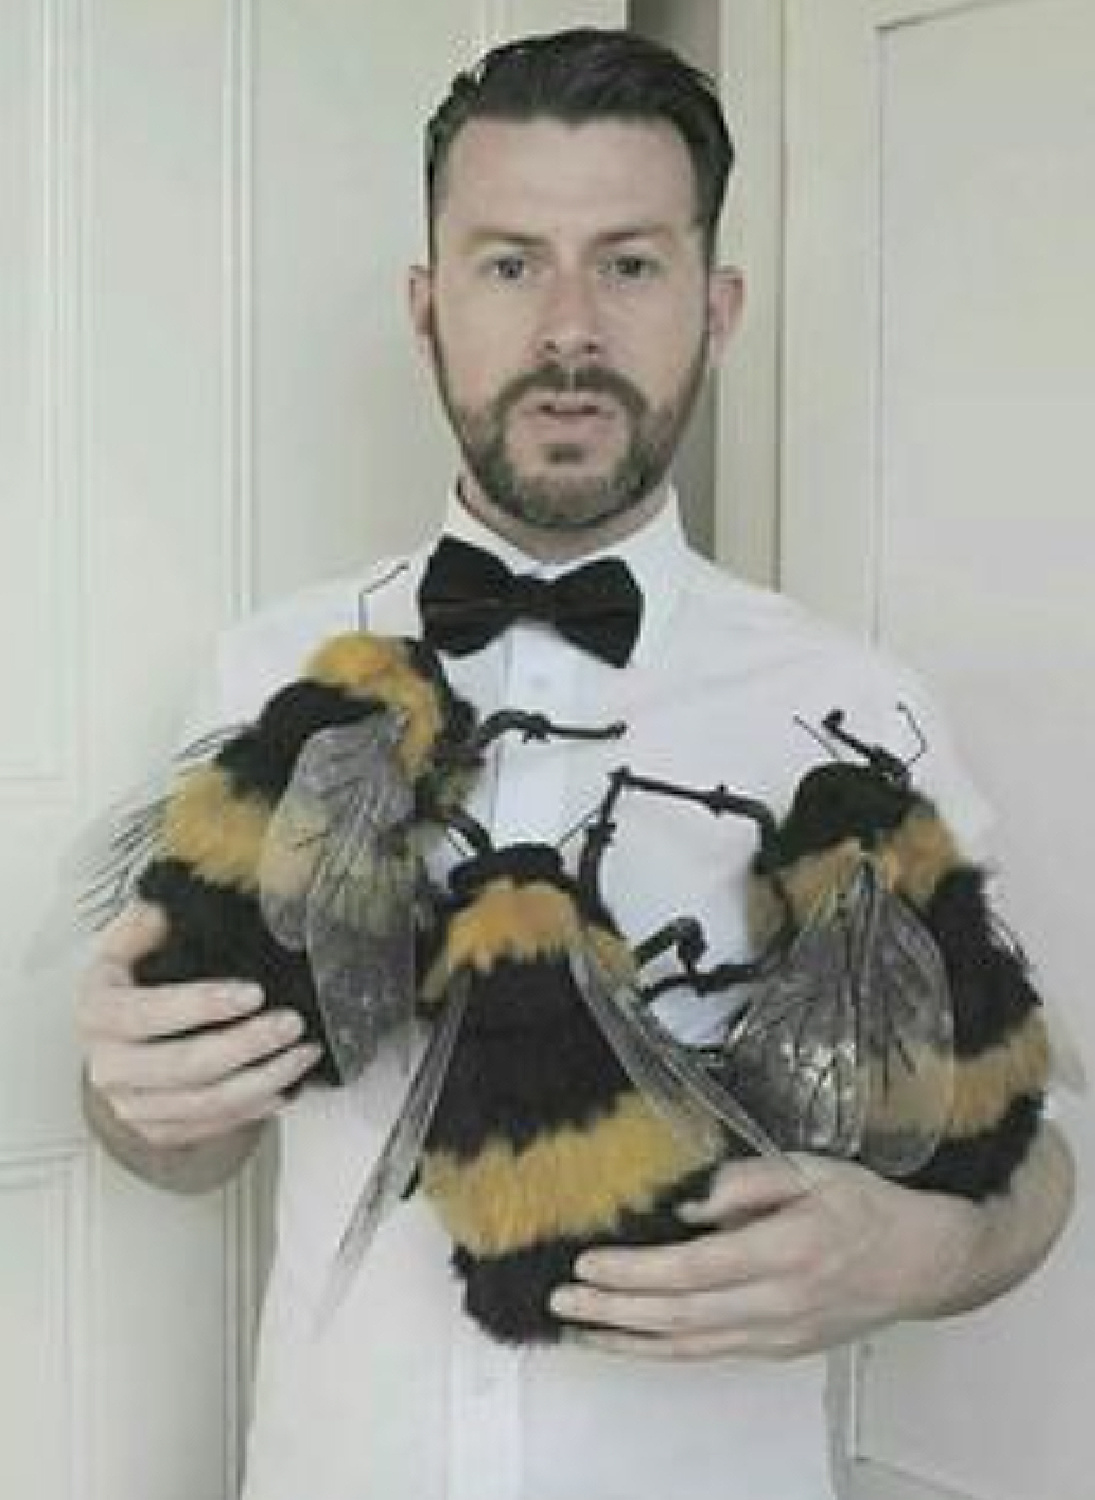 Mister Finch with his amazing bumblebee sculptures. #misterfinch #textileartist #bumblebees